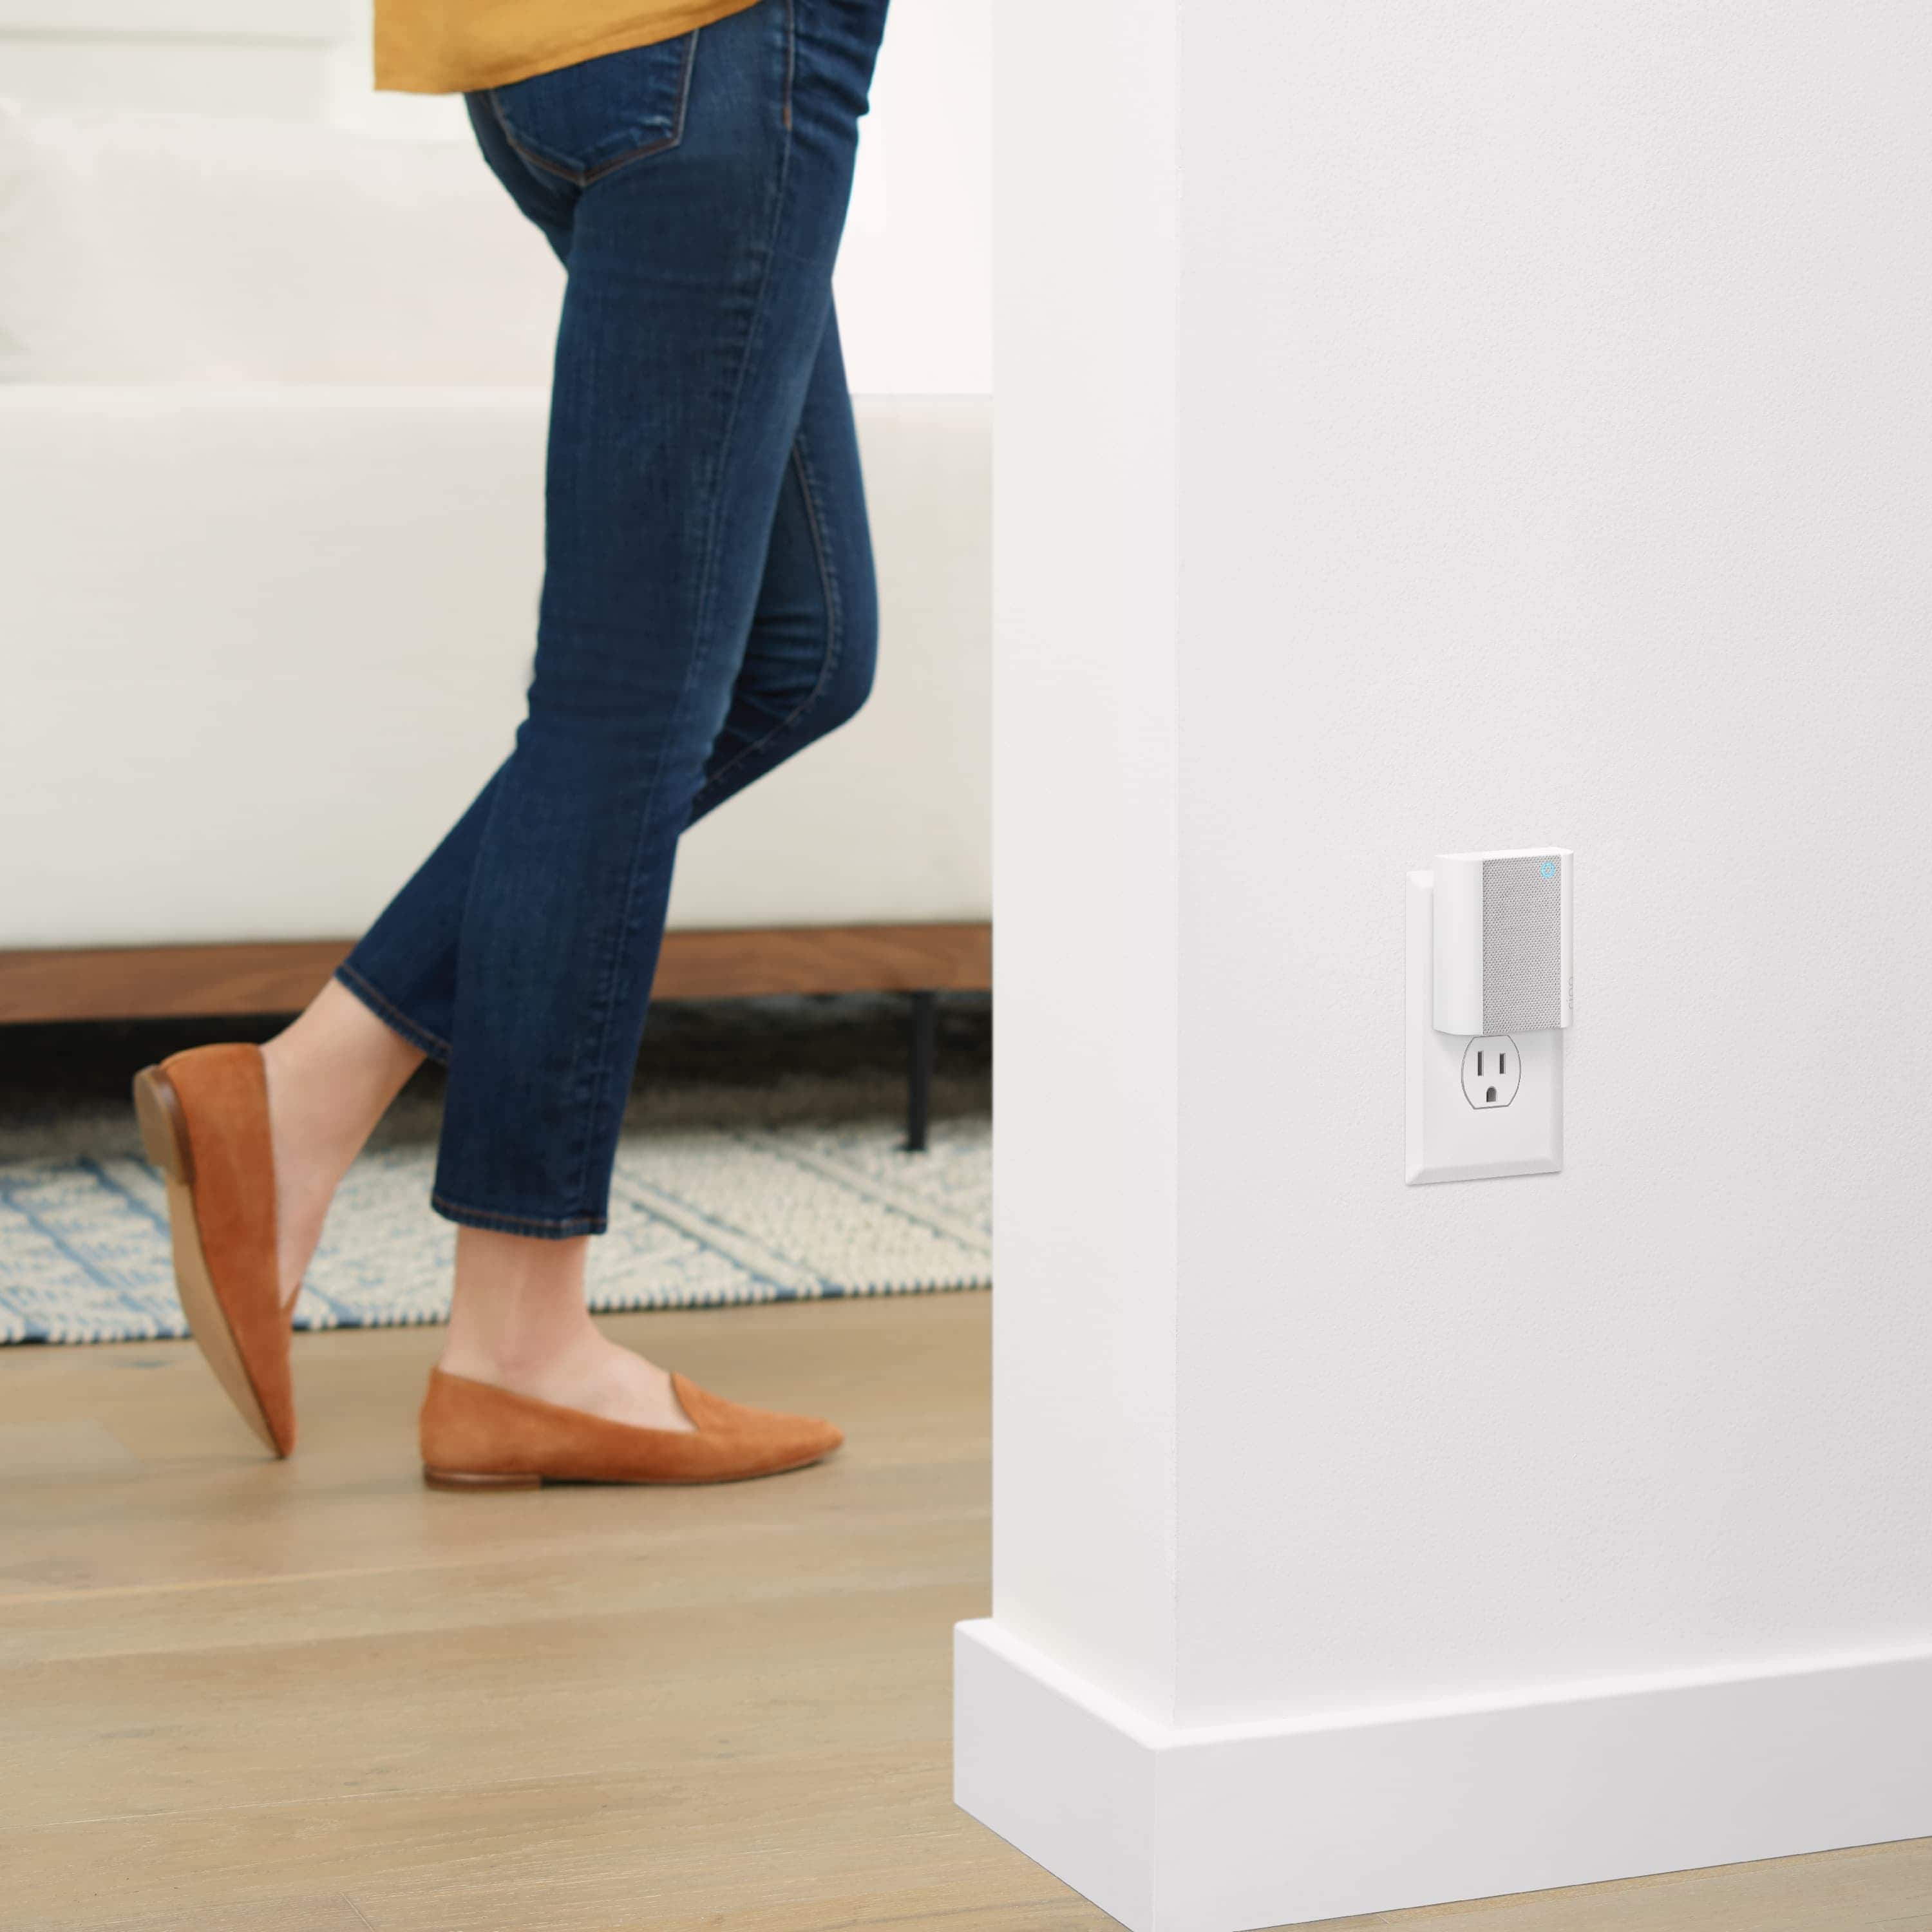 Chime - Chime: Ring Chime plugged into wall outlet with a person walking by in the background.